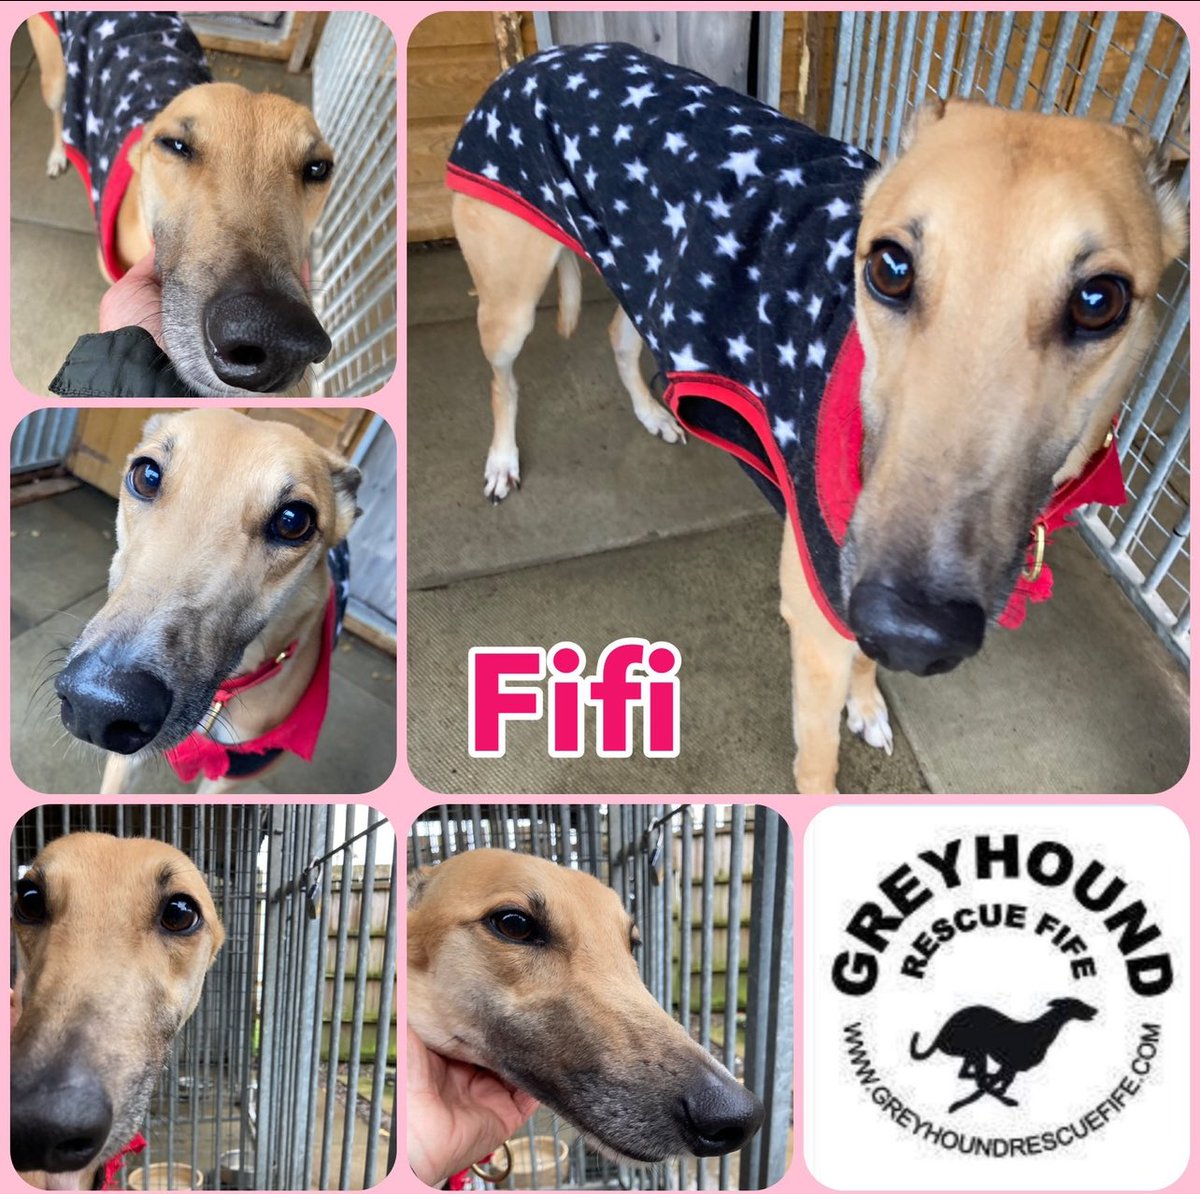 #Wednesdayvibe  #woofwoofwednesday
Pretty poppet on the lookout for a super duper home plz RT #Fifi #TeamZay @GreyhoundRFife